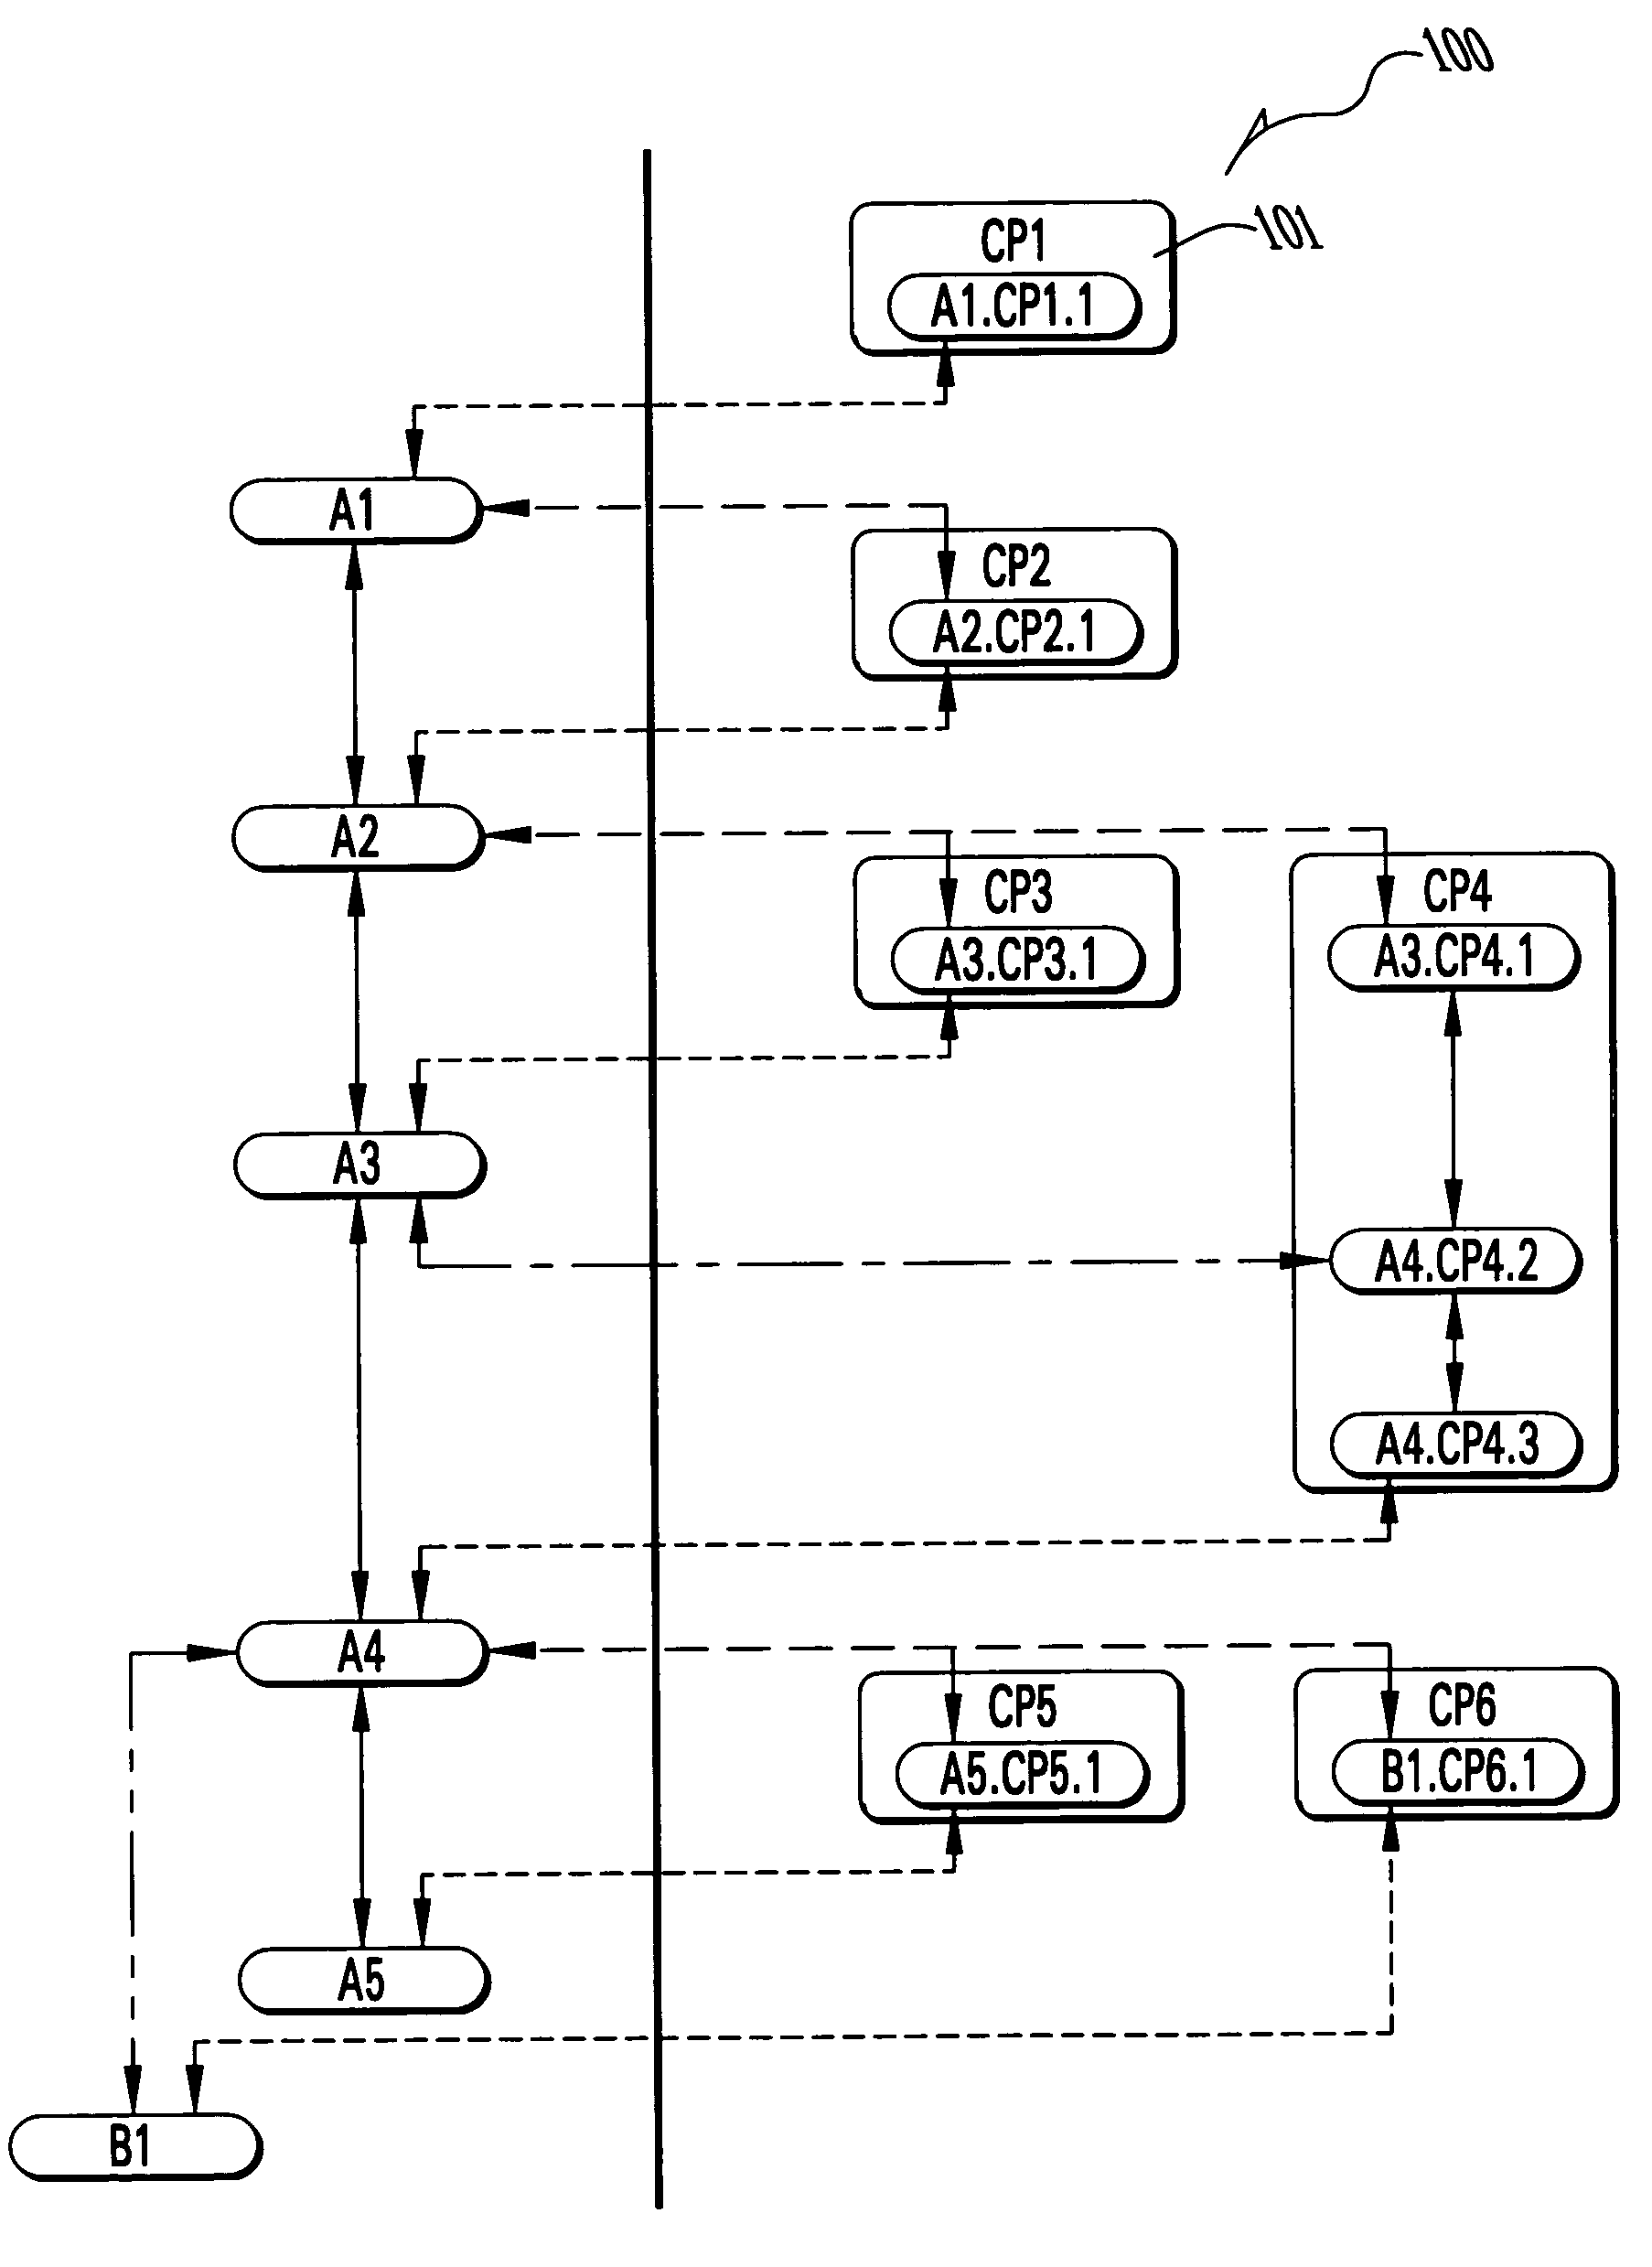 Method and system for managing the configuration of an evolving engineering design using an object-oriented database